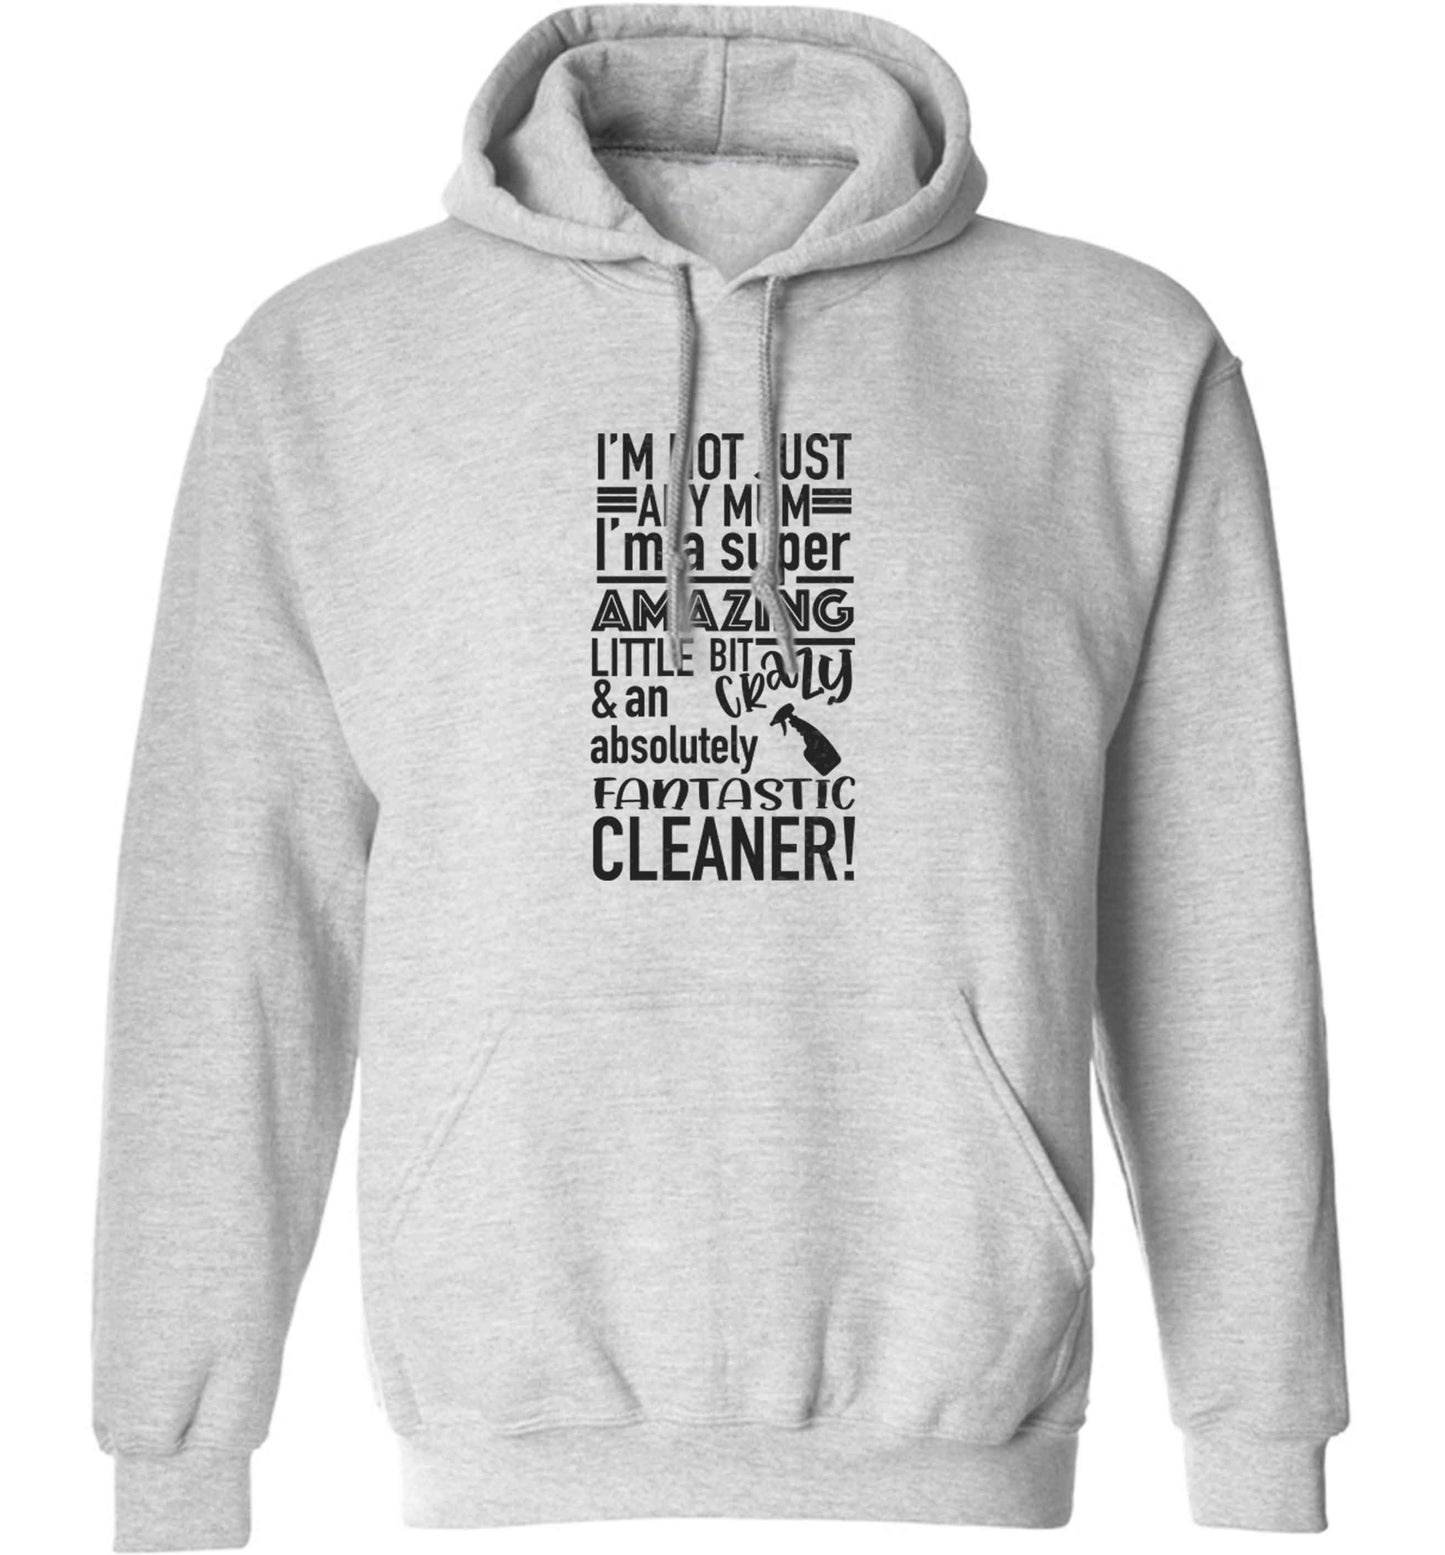 I'm not just any mum I'm a super amazing little bit crazy and an absolutely fantastic cleaner! adults unisex grey hoodie 2XL